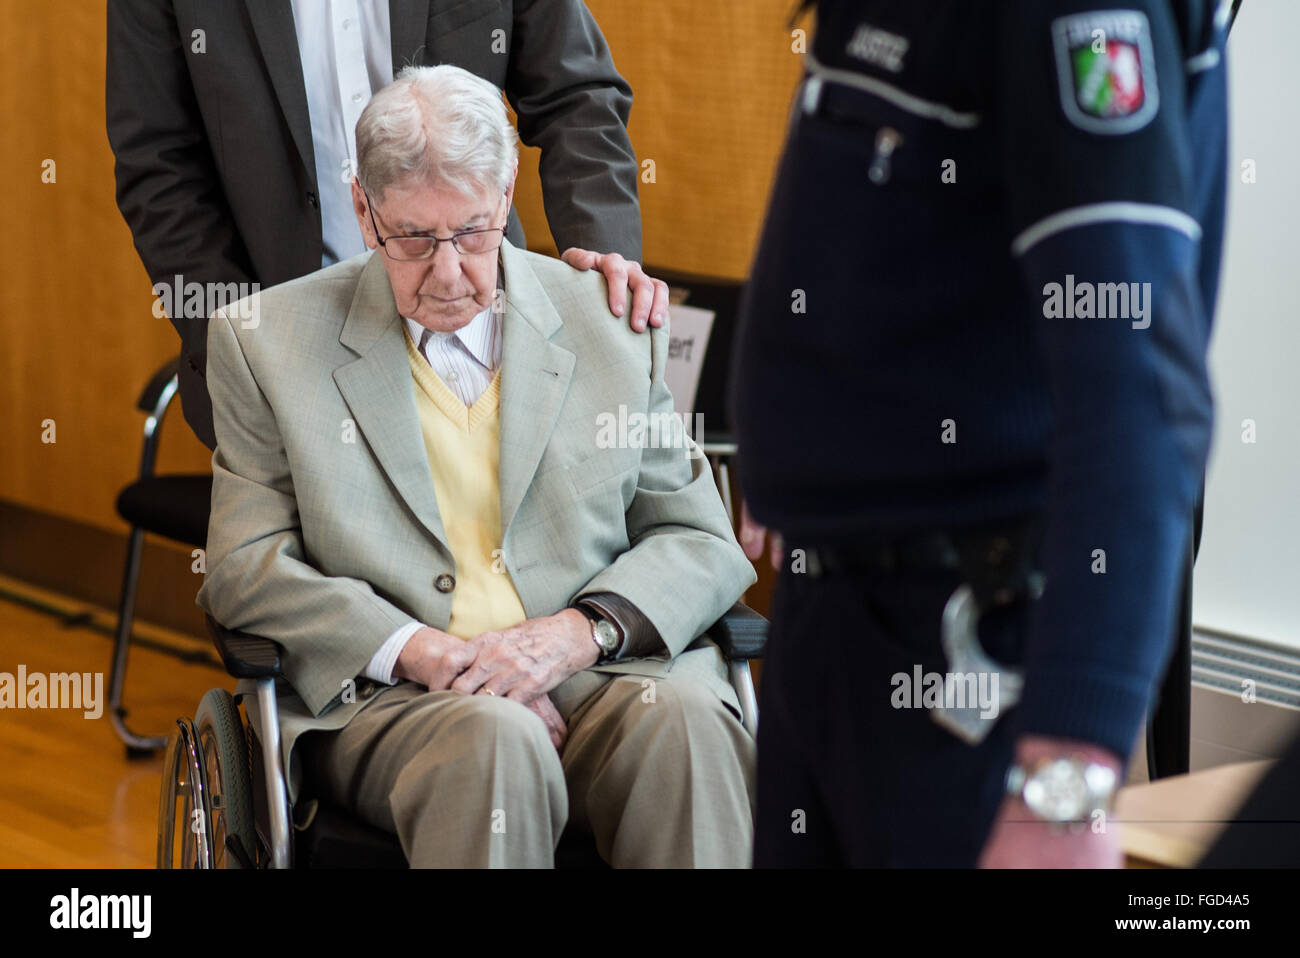 Detmold, Germany. 19th Feb, 2016. Former Auschwitz guard Reinhold Hanning arrives for his trial in Detmold, Germany, 19 February 2016. The 94-year old is accused of accessory to murder in 170,000 cases. The trial lead by the regional court of Detmold takes place at the rooms of the Chamber of Industry and Commerce (IHK) in Detmold. Photo: Bernd Thissen/dpa/Alamy Live News Stock Photo